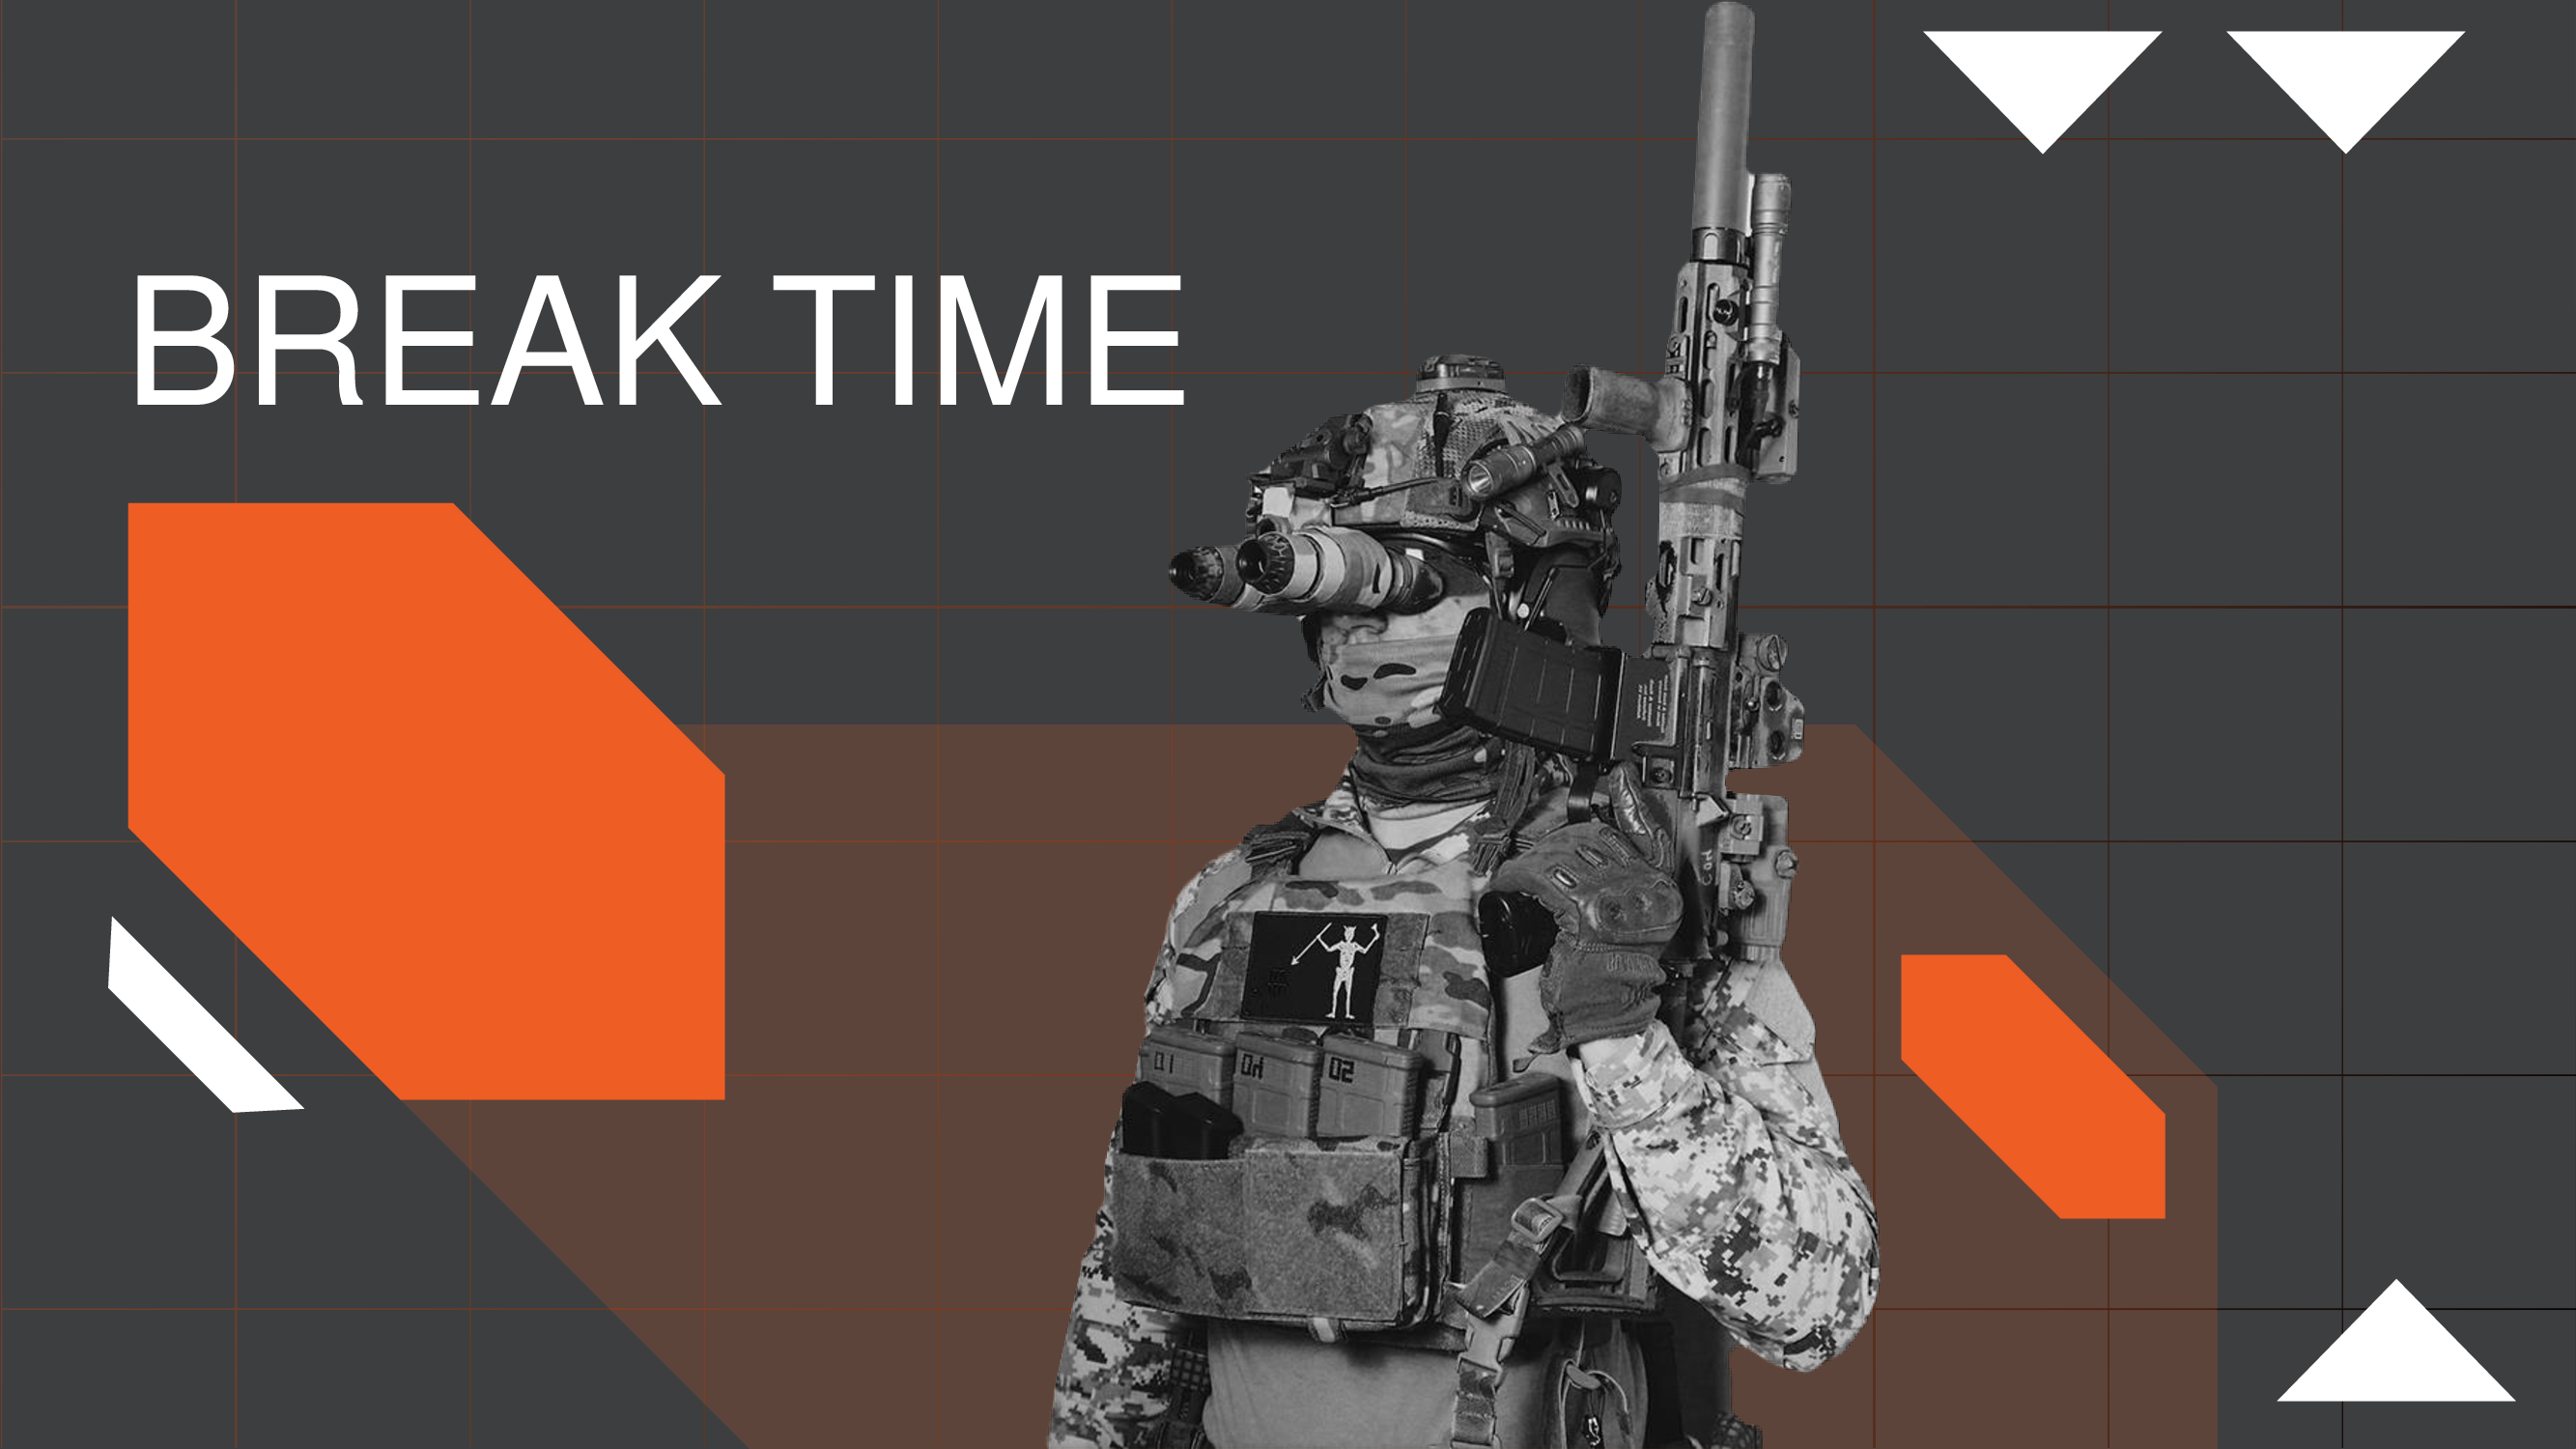 White lettering "Break time" on a gray background with army.